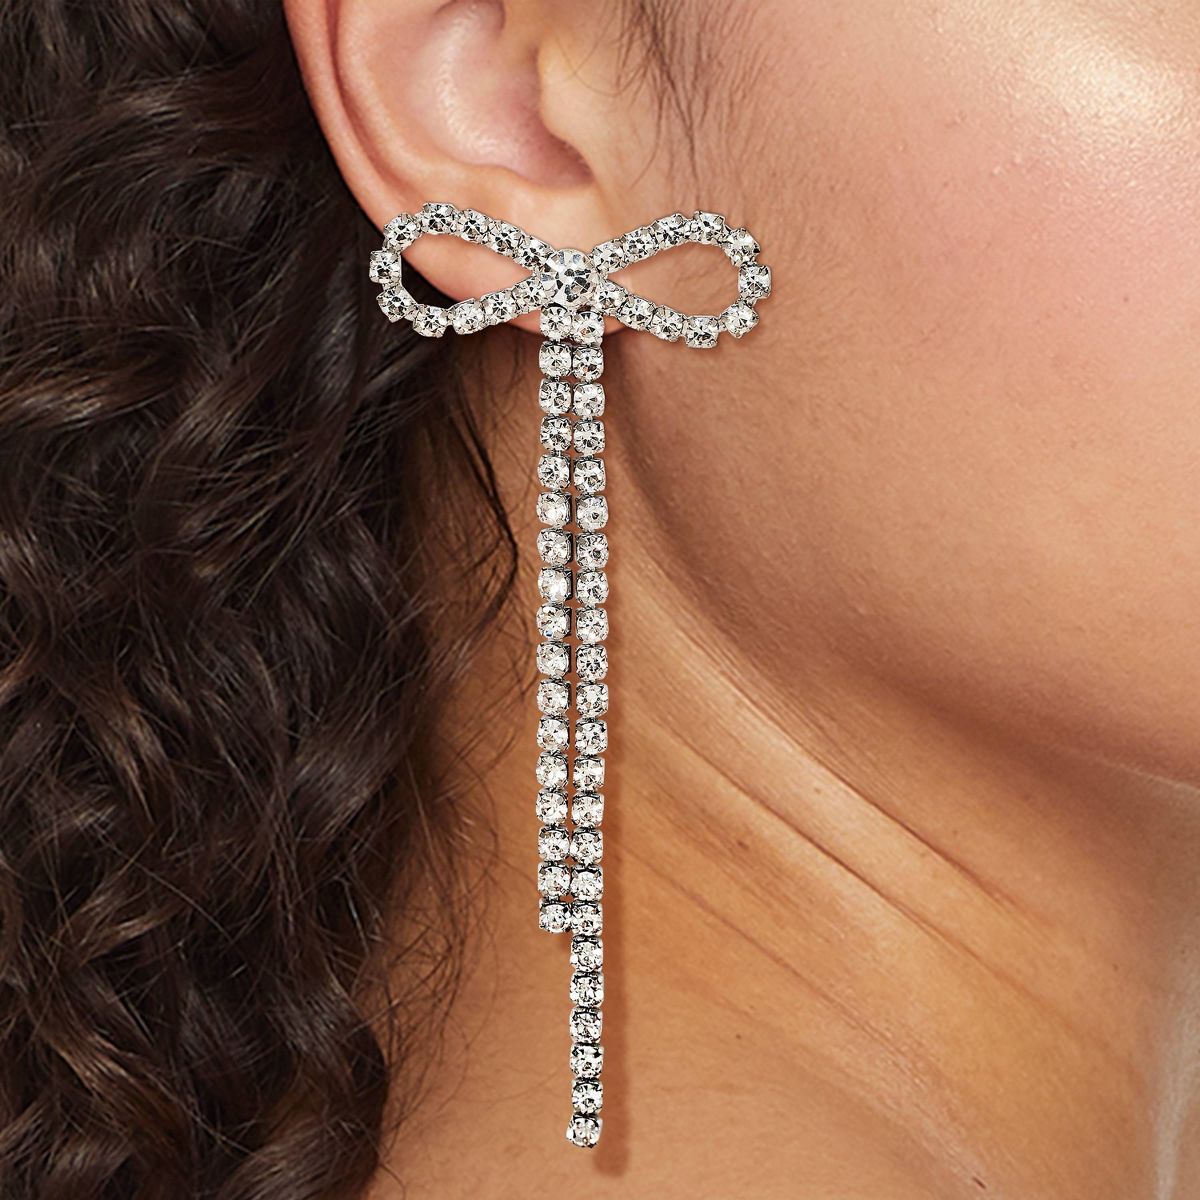 Rhinestone Bow with Fringe Drop Earrings - Wild Fable™ Silver | Target